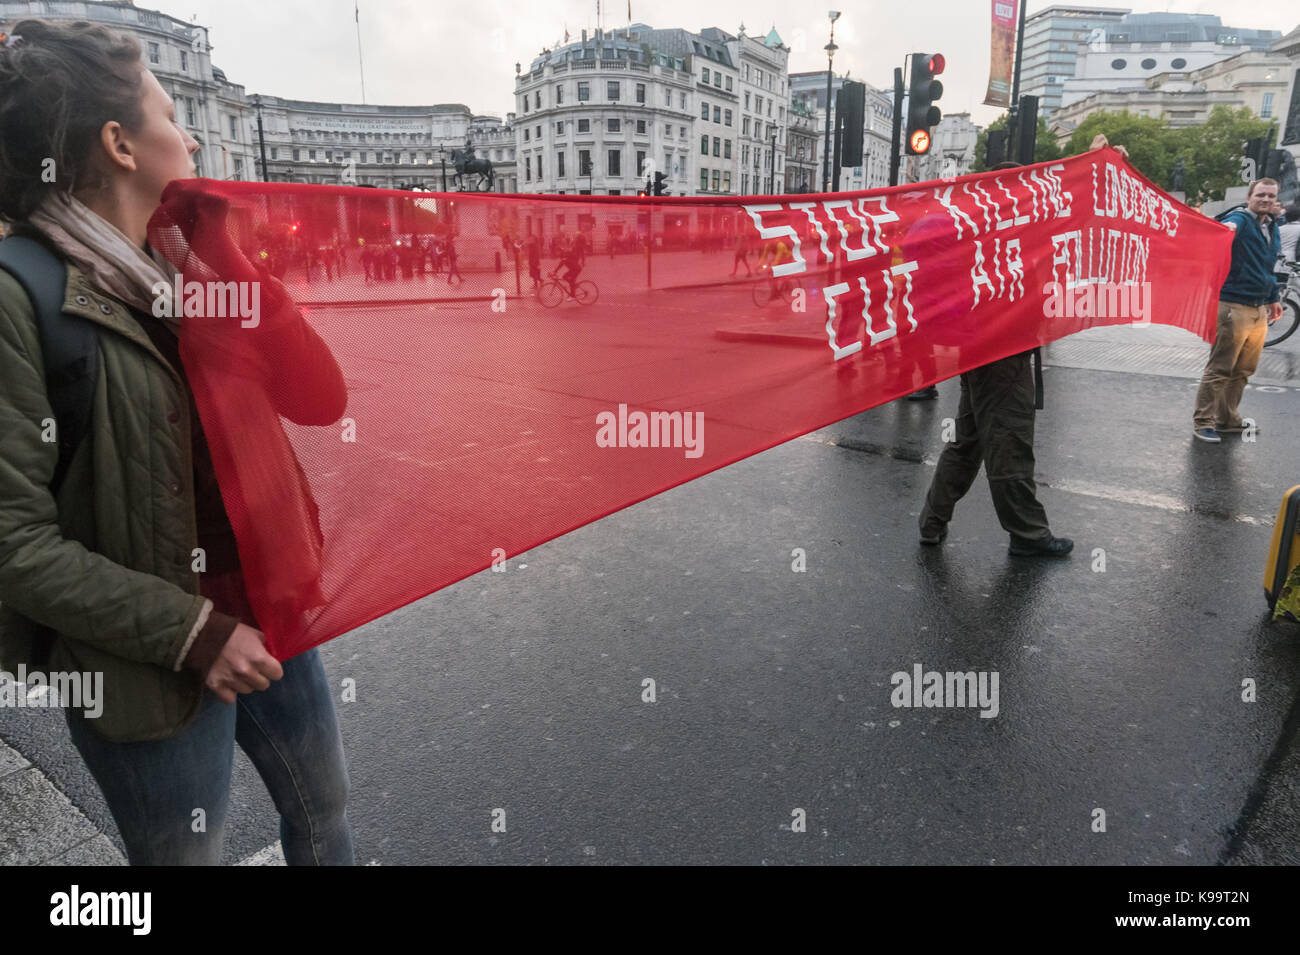 September 21, 2017 - London, UK - London, UK. 21st September 2017. Campaigners for 'Stop Killing Londoners' hold a banner in Trafalgar Square cleared of traffic in a short protest against the illegal levels of air pollution in the capital which result in 9,500 premature deaths and much suffering from respiratory disease. In a carefully planned protest they blocked all five entrances to the roundabout at the square, emptying it of traffic while they spoke about the problem and handed out leaflets. This was the 5th protest by campaigners from Rising Up aimed at mobilising people across London to Stock Photo